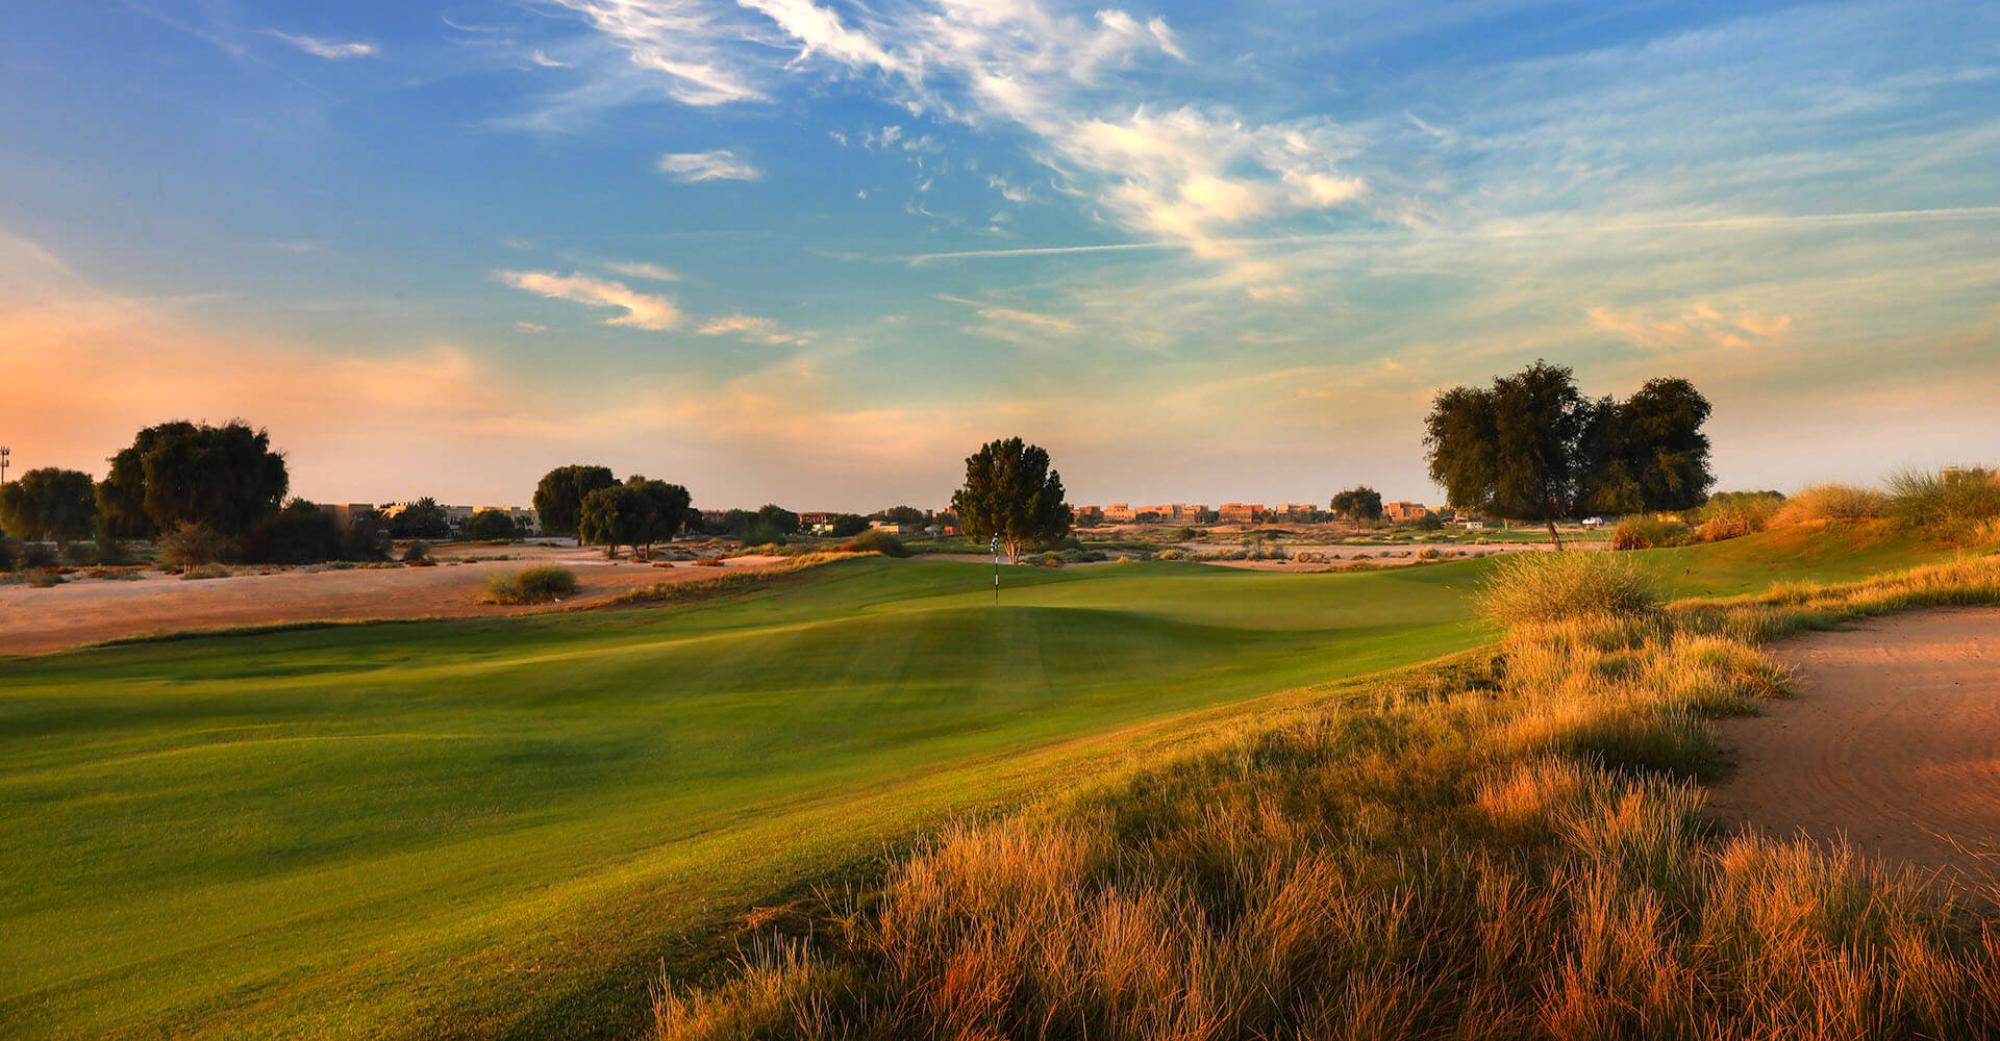 Arabian Ranches Golf Club includes among the most popular golf course within Dubai